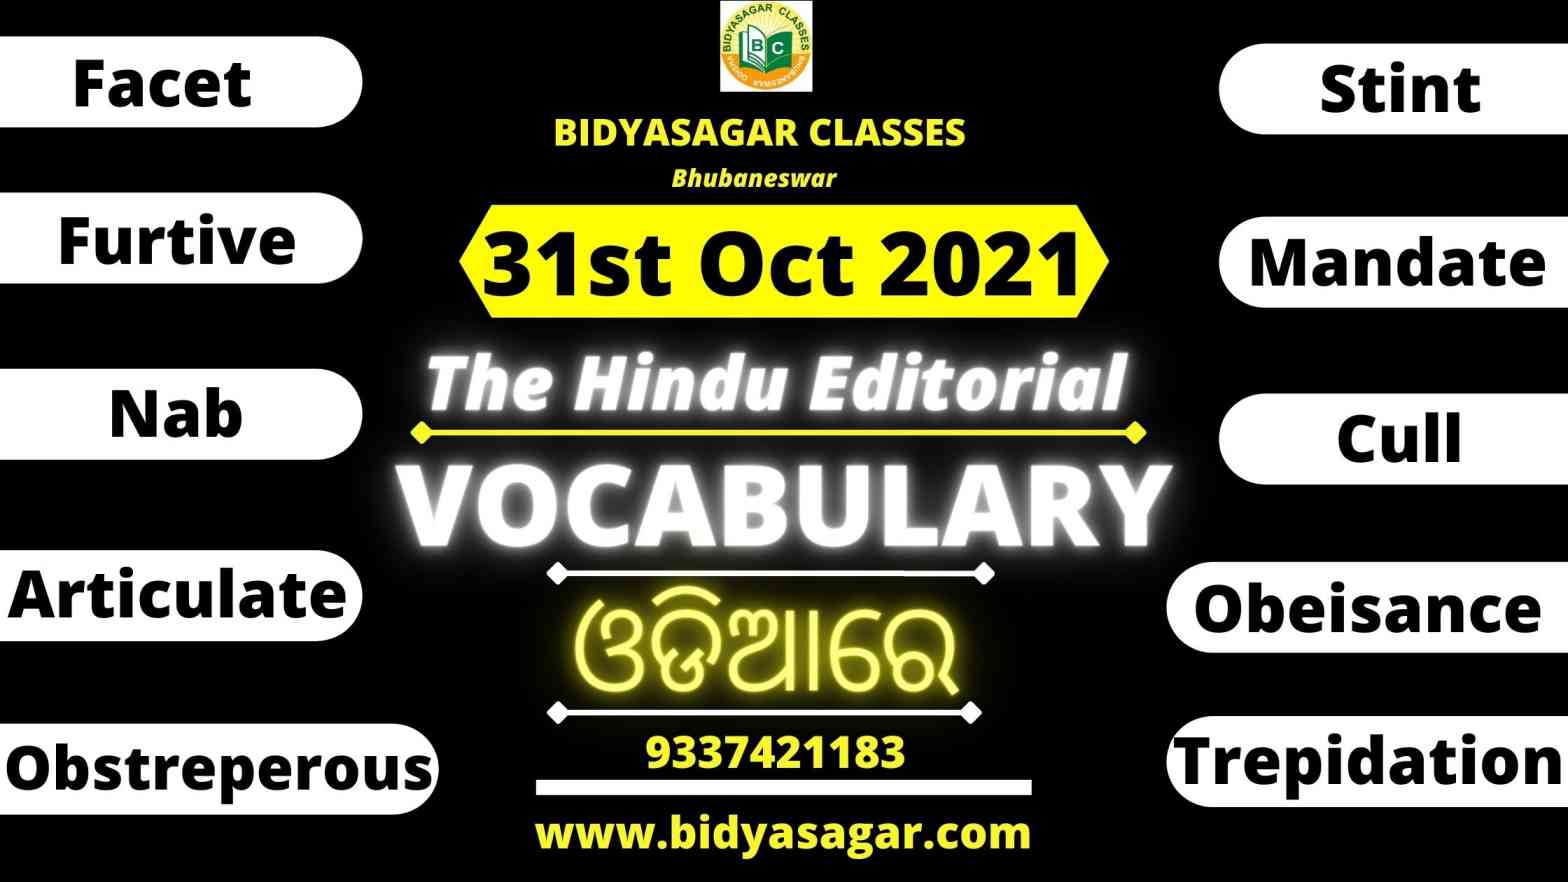 The Hindu Editorial Vocabulary of 31st October 2021